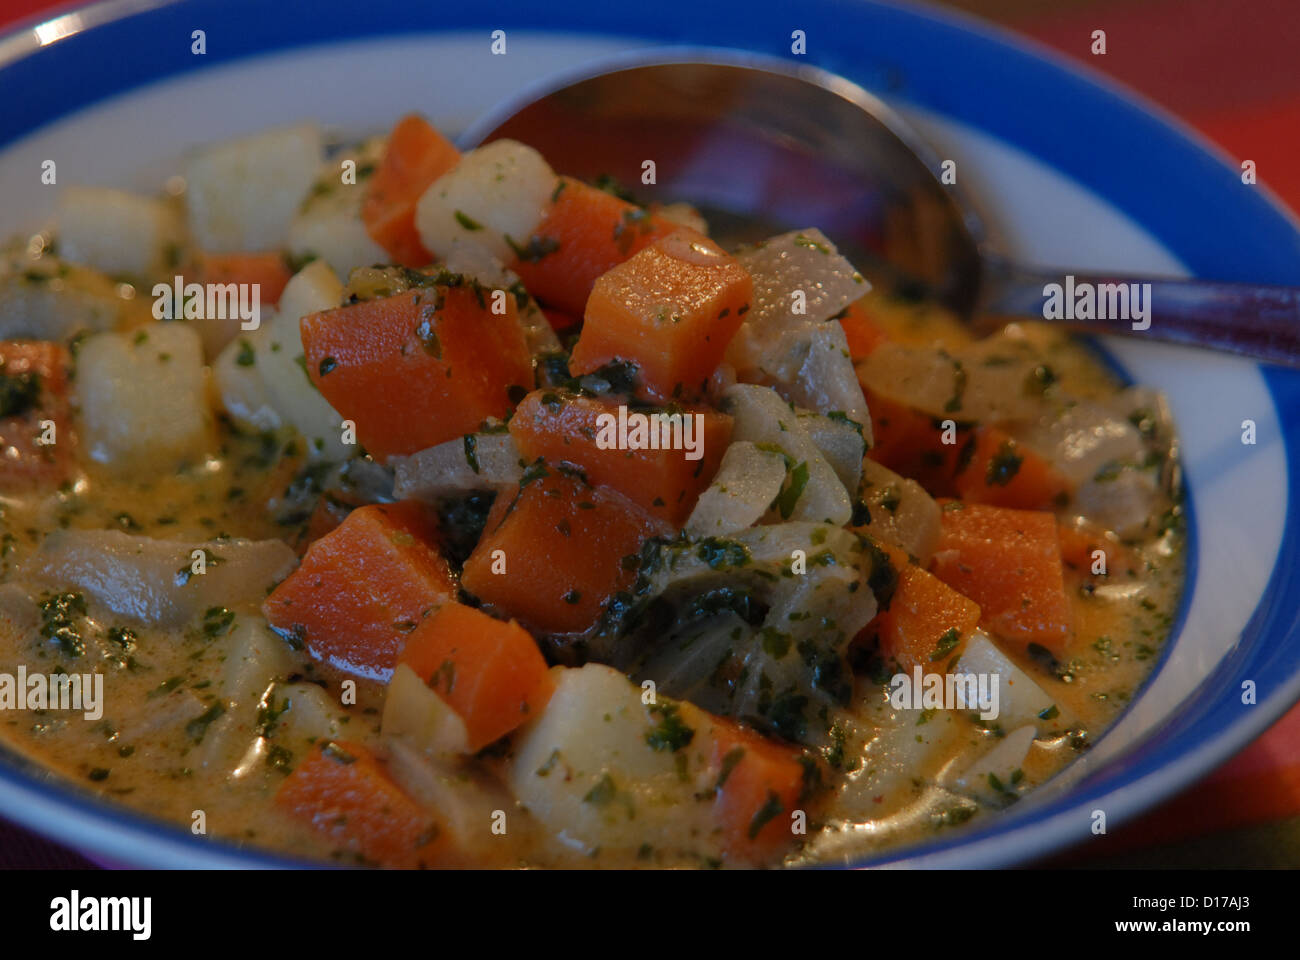 Vegetable soup. Stock Photo